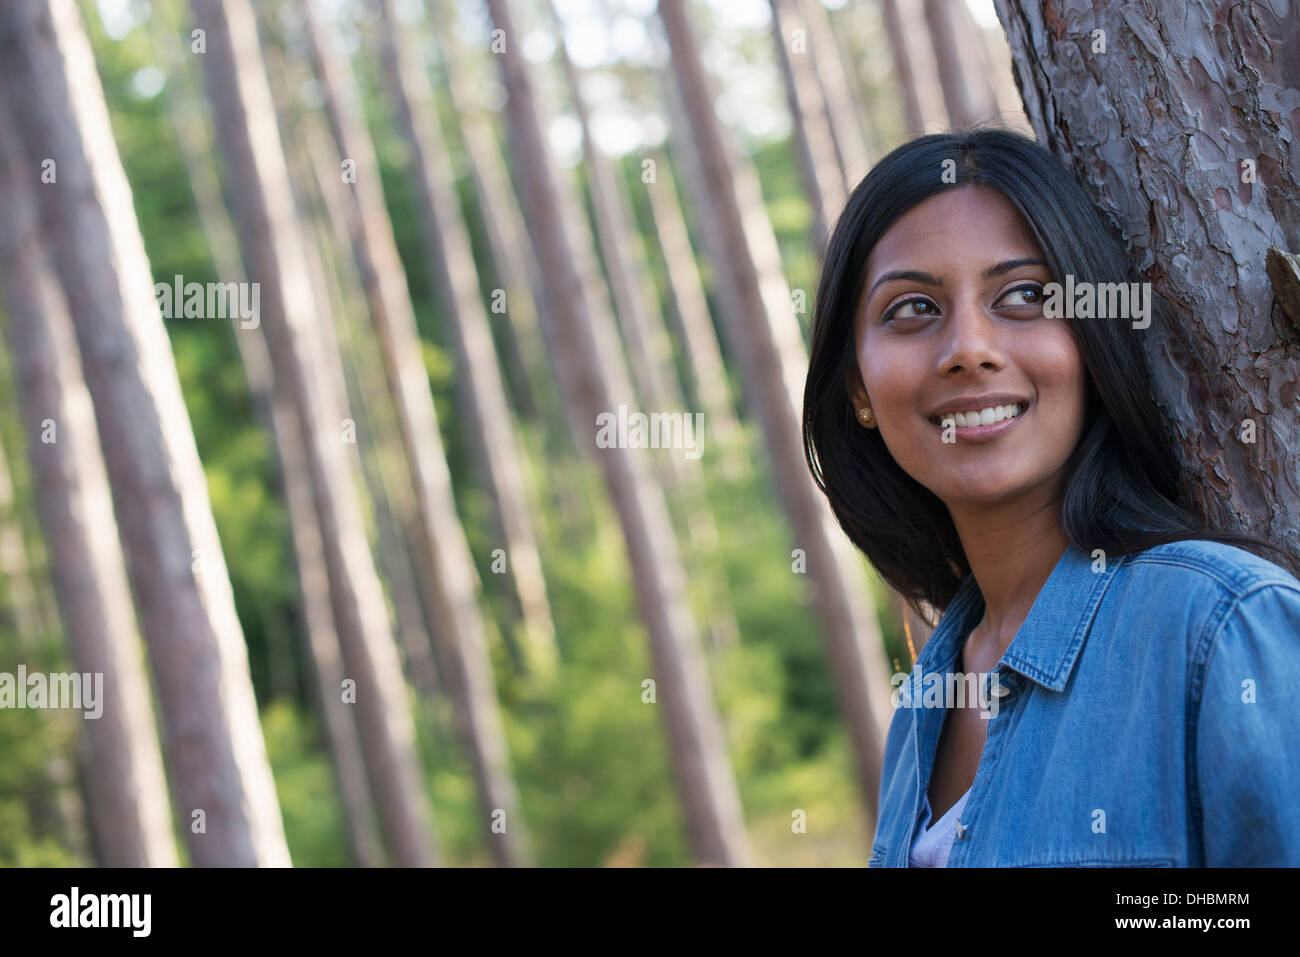 Trees on the shores of a lake. A woman standing in the shade. Stock Photo